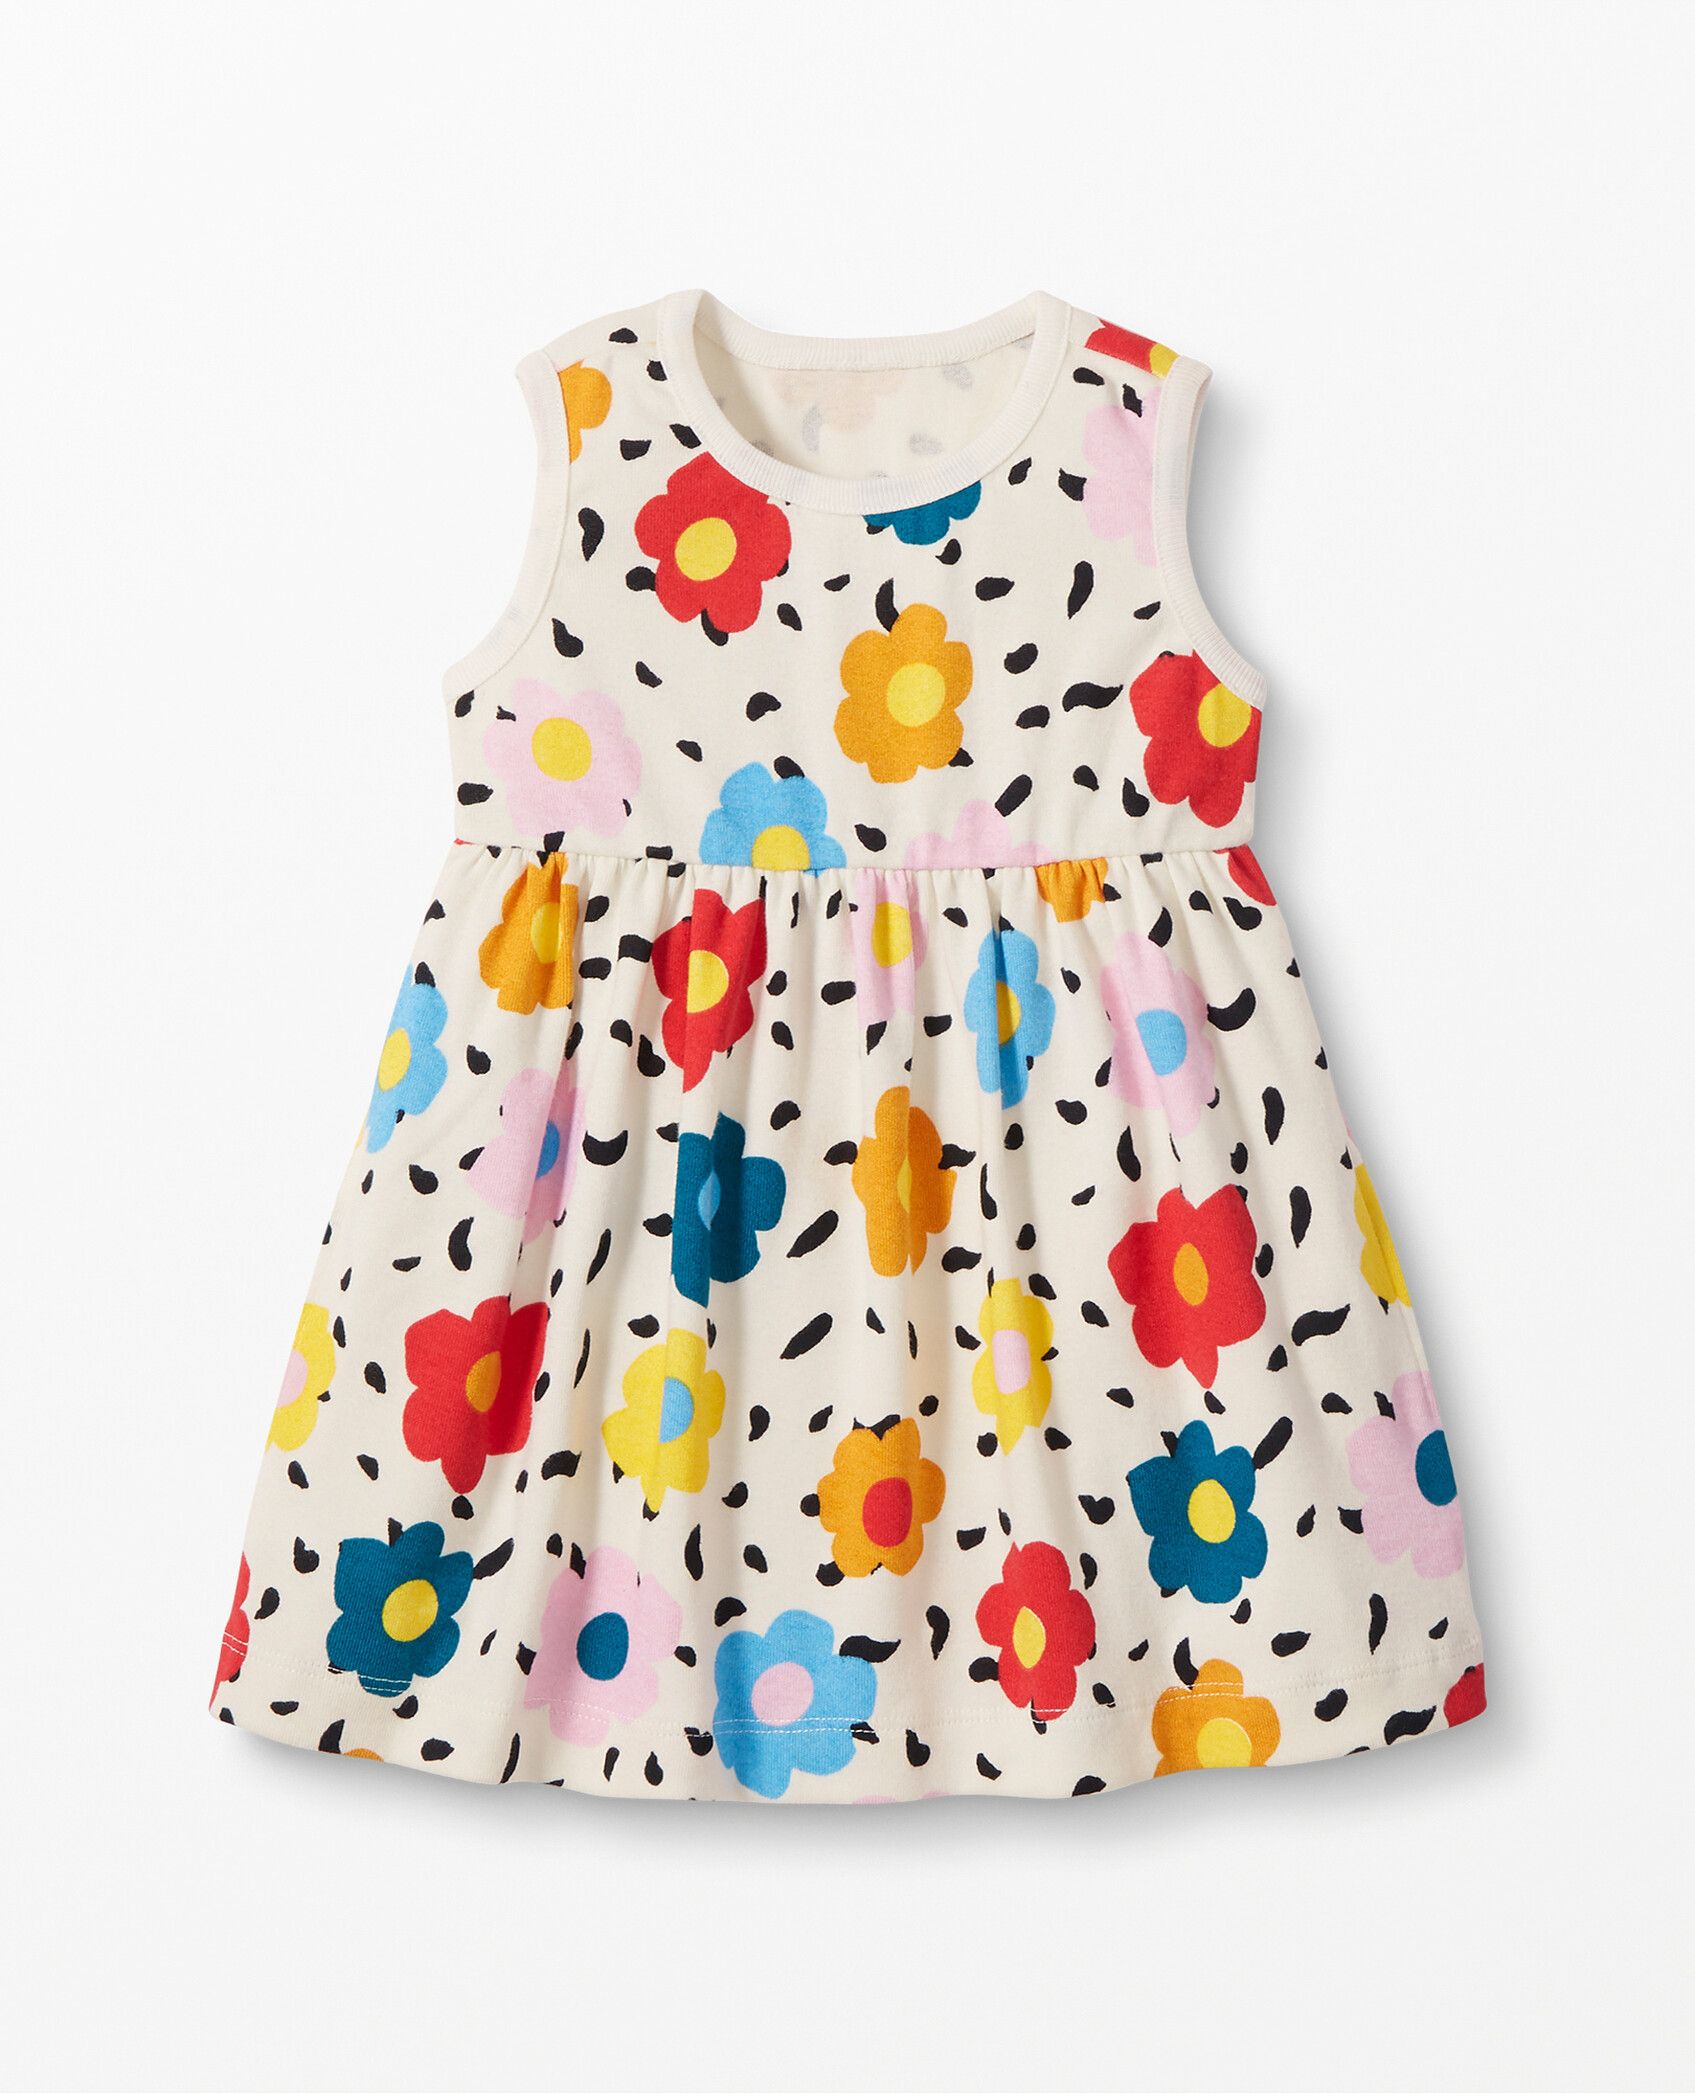 Printed Play Dress | Hanna Andersson